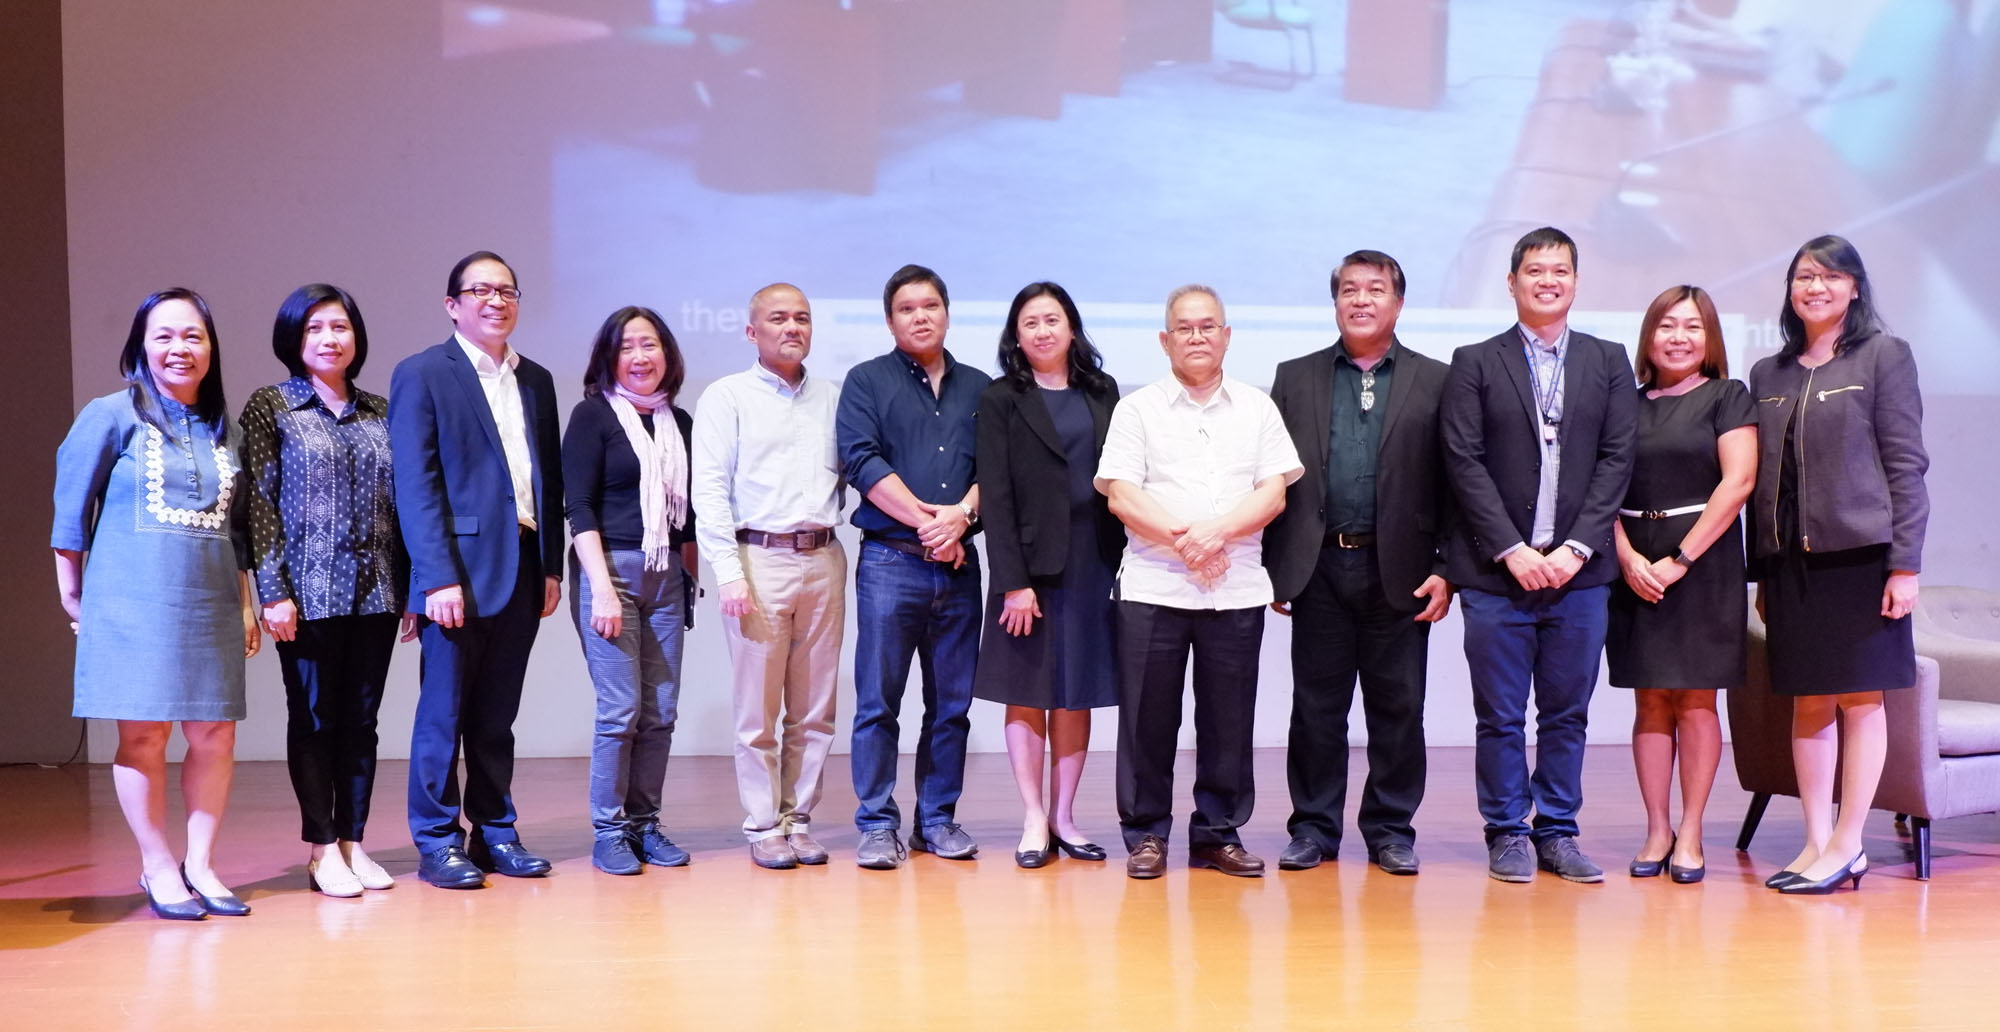 PASCN Regional Symposium on Disruptive Technologies: Opportunities, Challenges, and Risks-pascn-usc-1-20190123.jpg